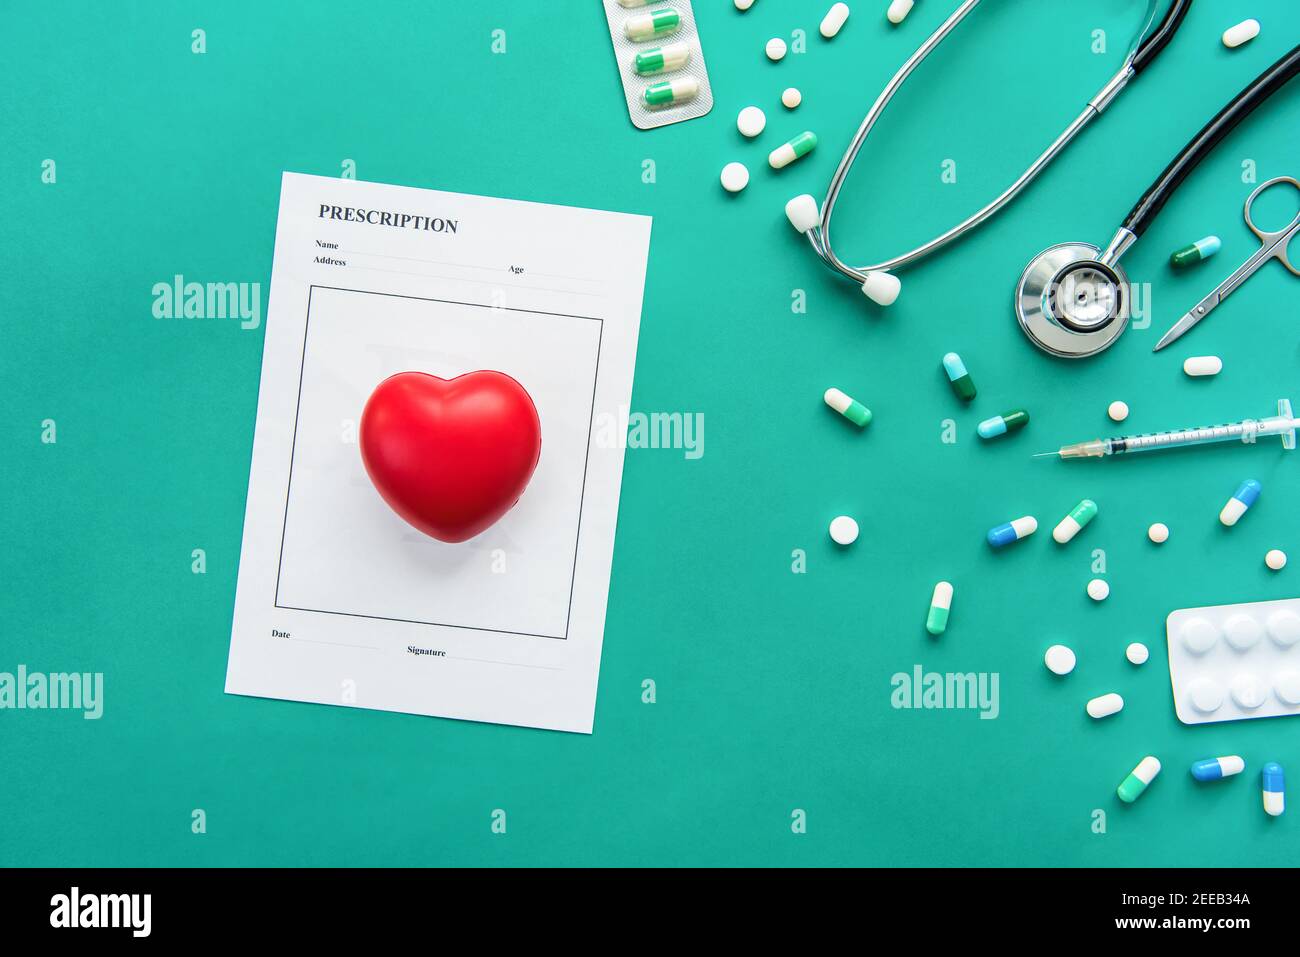 Drugs and medical instruments including stethoscope, syringe, scissors and prescription with red heart shape ball on green background Stock Photo